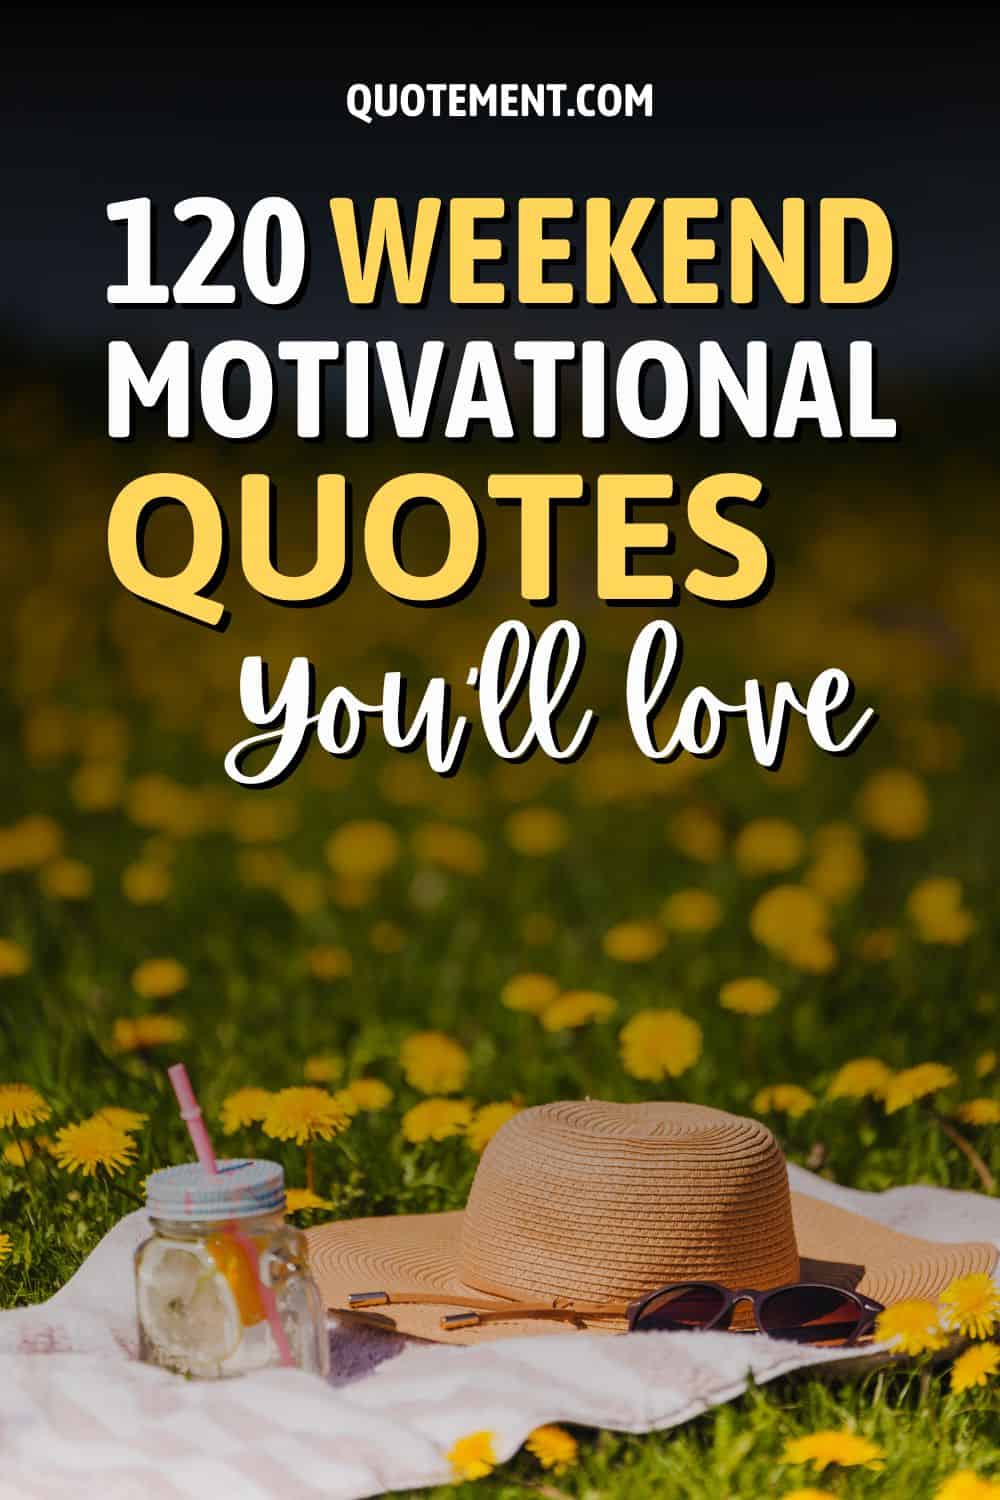 120 Weekend Motivational Quotes To Make The Most Out Of It